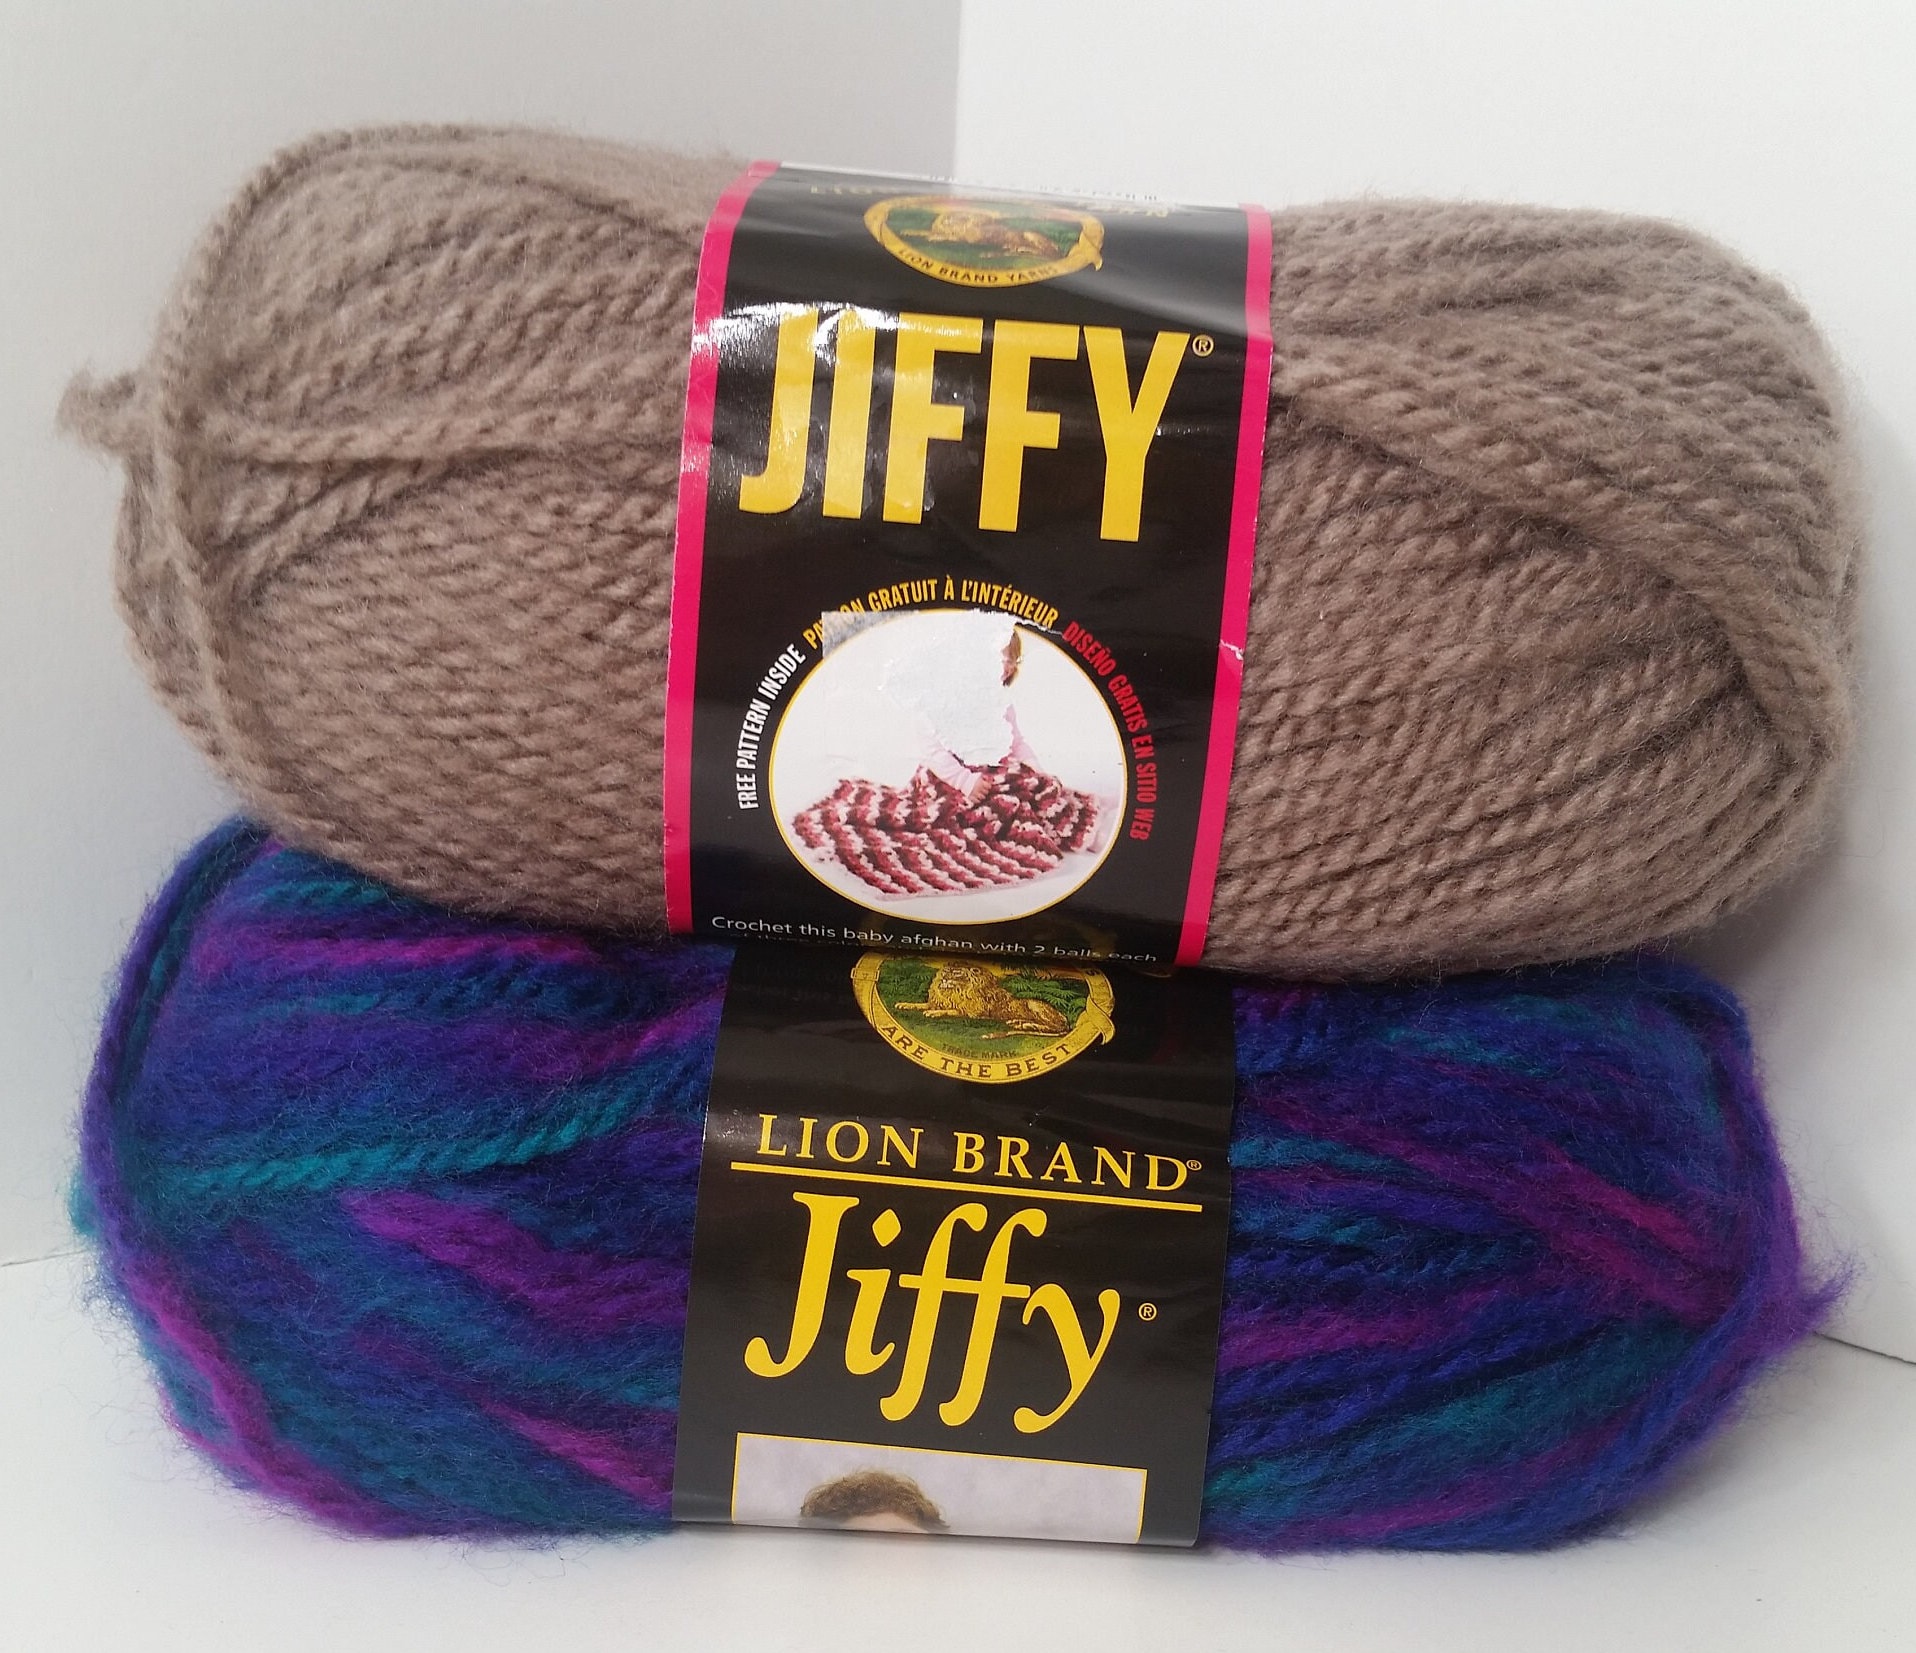 1 Skein 8 Skeins Available From 2 Colors Lion Brand Jiffy Yarn